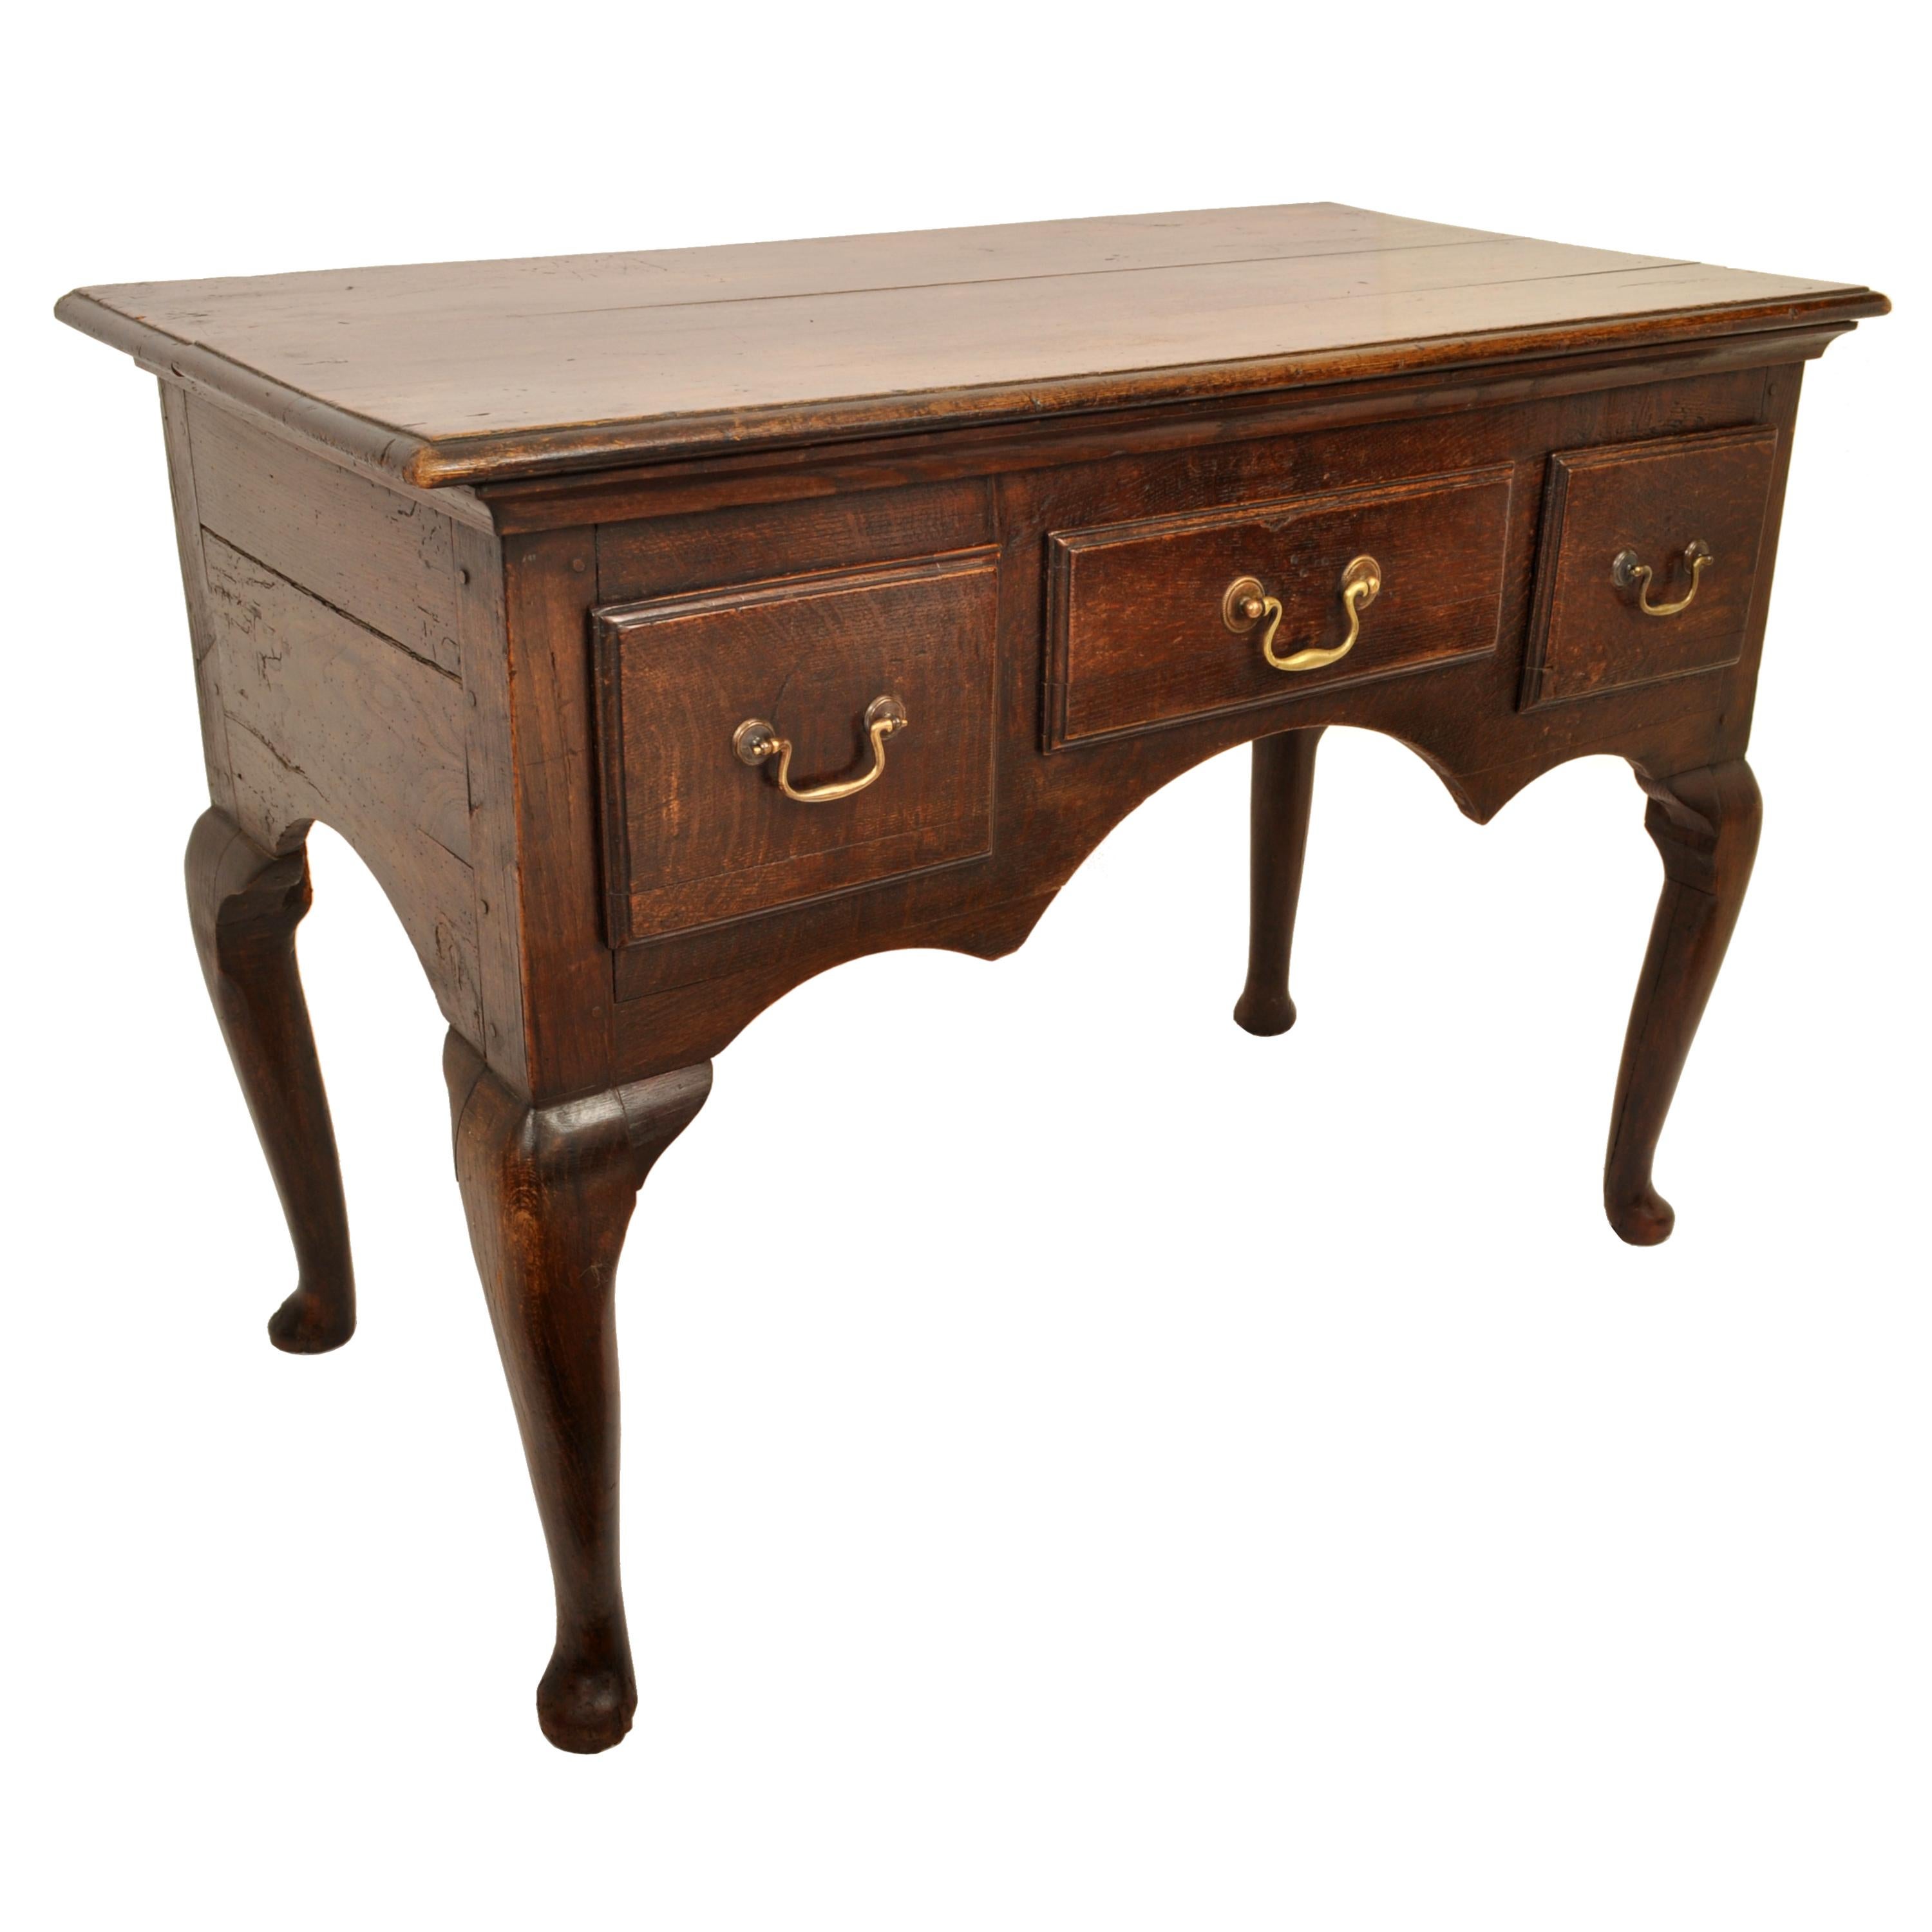 A good and early antique Georgian oak lowboy/dressing table, circa 1750.
The George II lowboy having an overhanging top, with a carved kneehole with three drawers above, each having brass bail handles. The lowboy is raised on cabriole legs